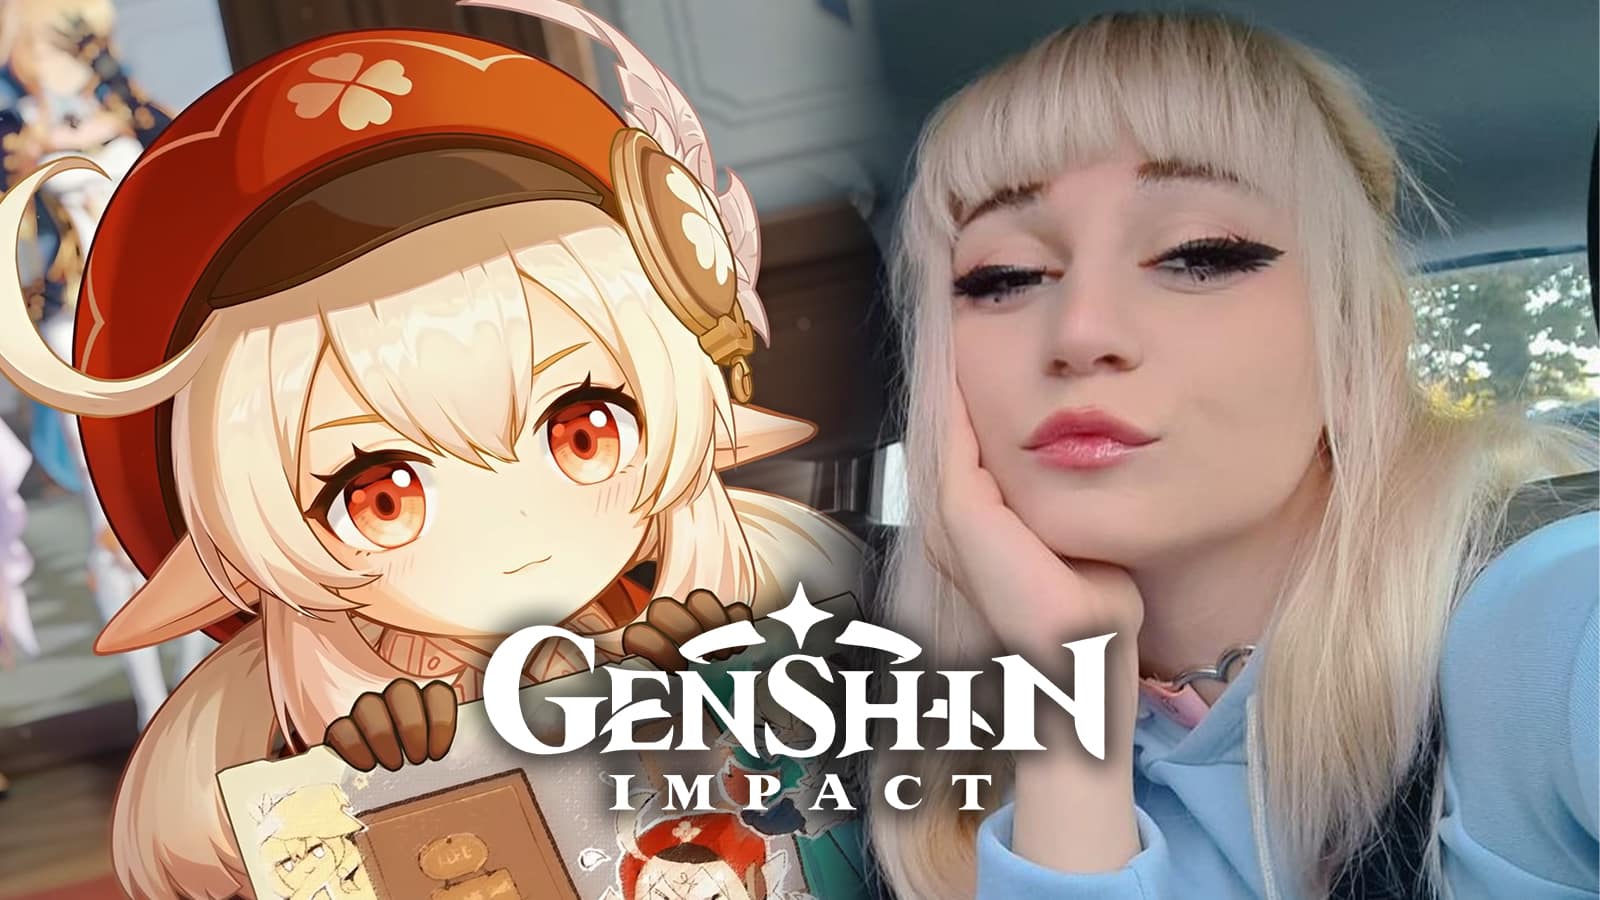 Genshin Impact - Klee Abilities, Artifacts, and Team Comp Guide - GameSpot